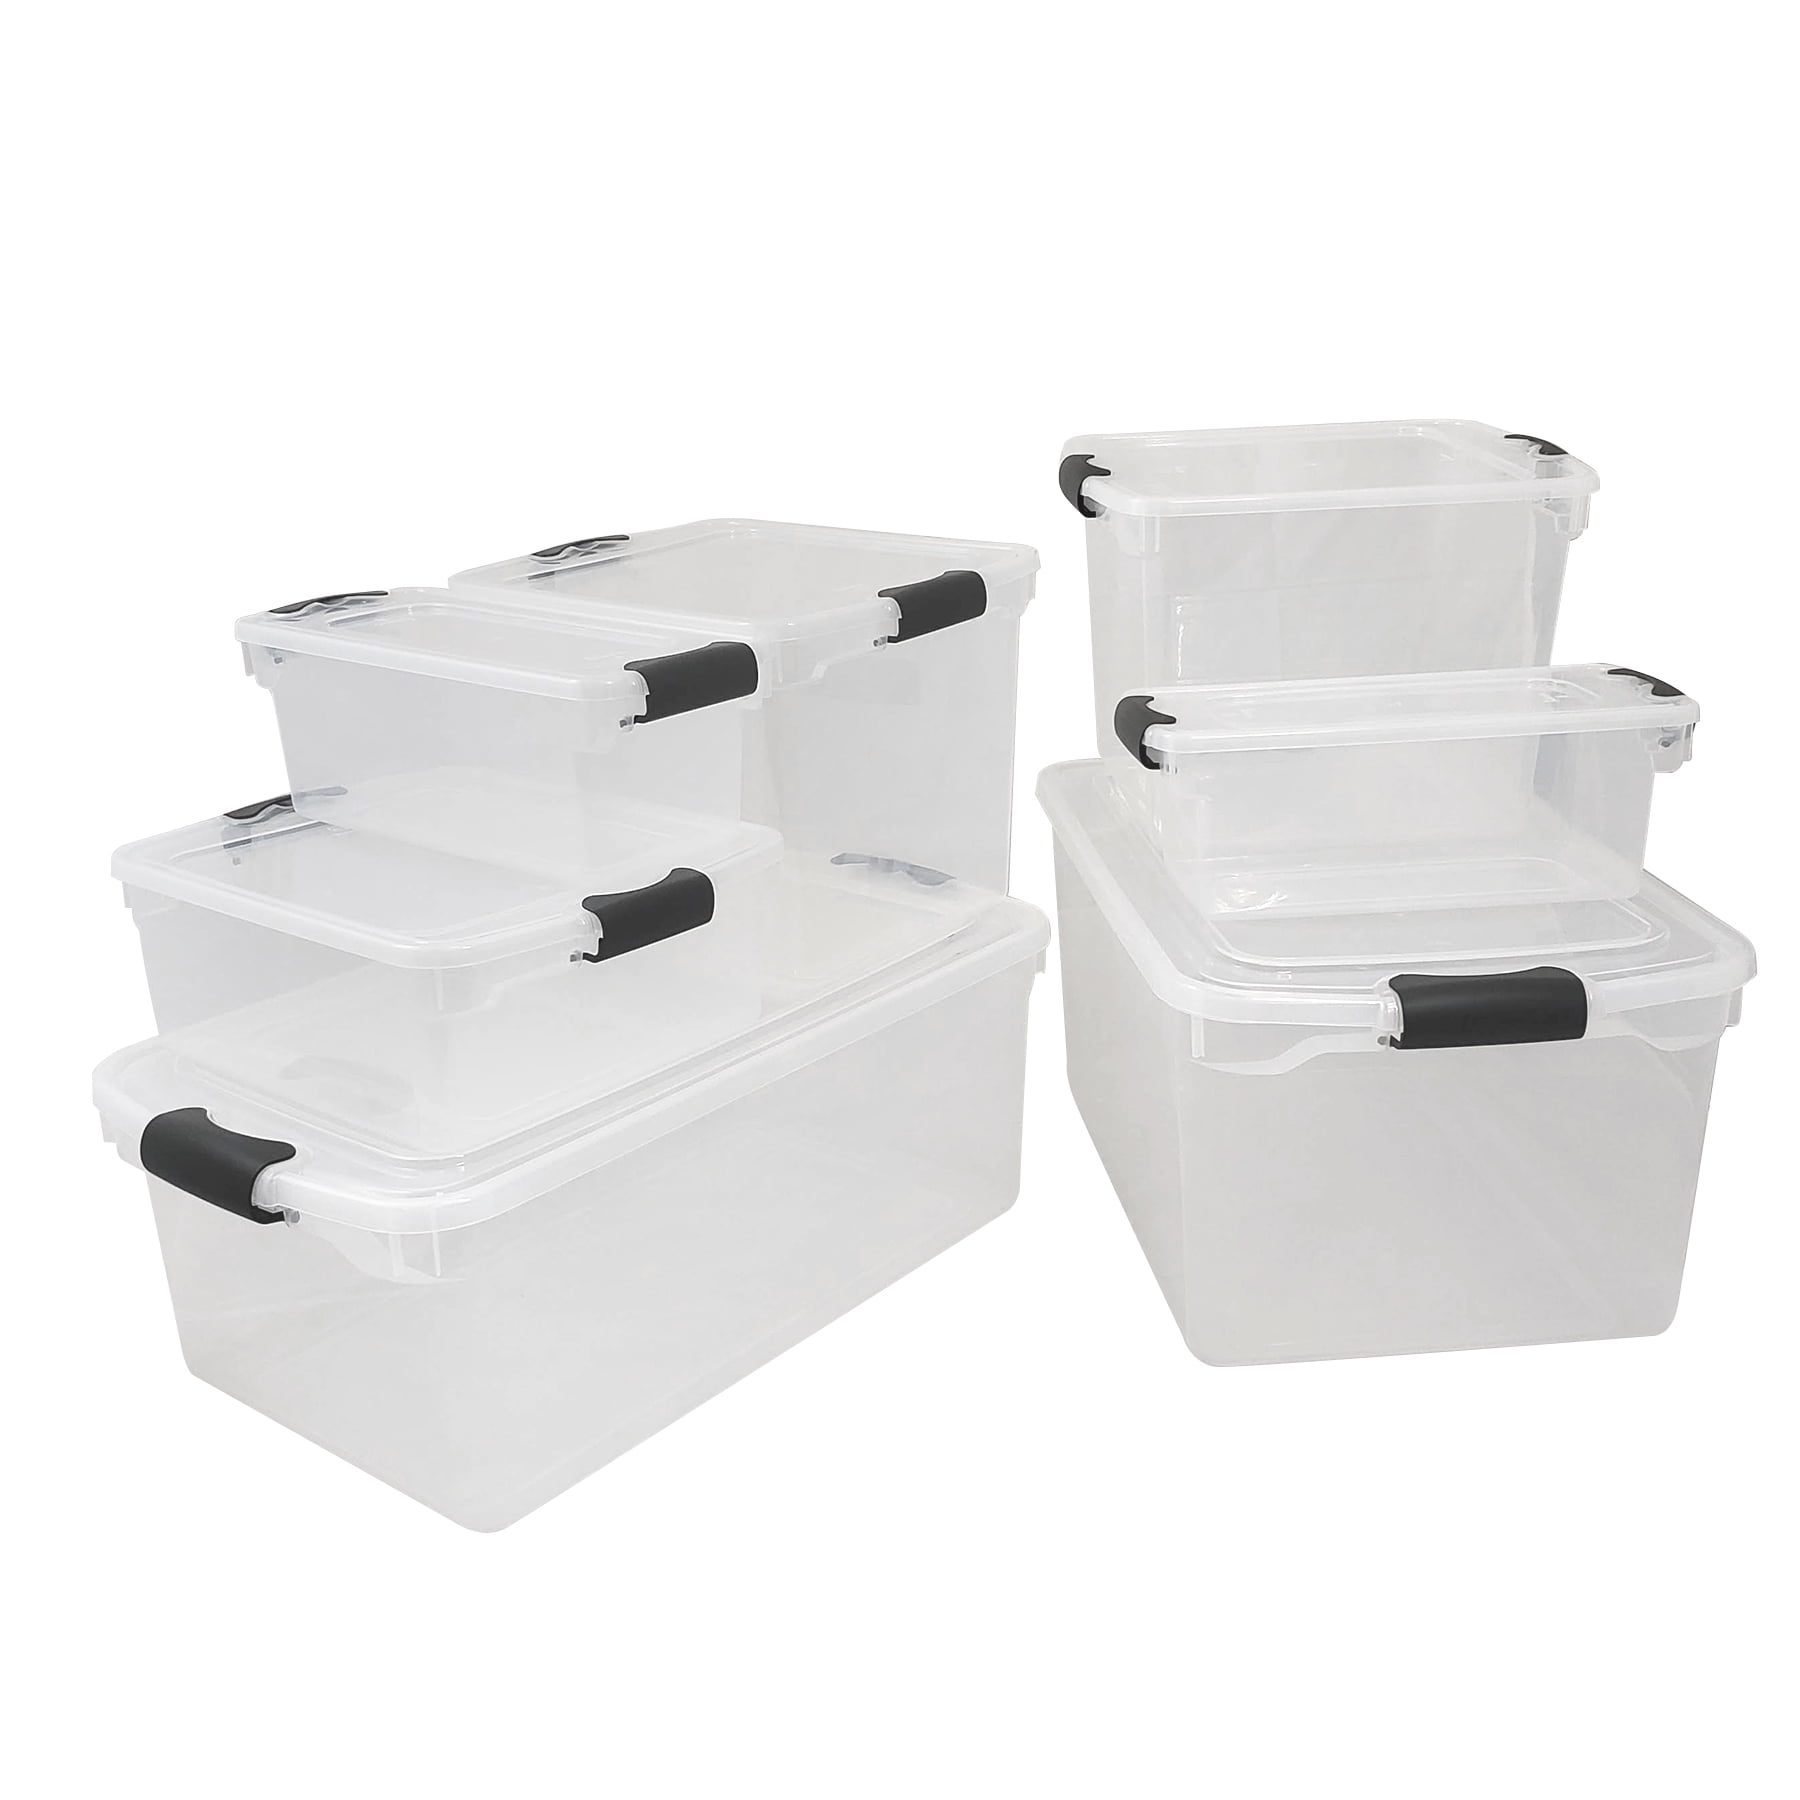 Homz Heavy Duty Modular Stackable Storage Tote Containers With Latching Lids,  66 Quart Capacity For Home, Garage, Or Office Organization, Clear 4 Pack :  Target